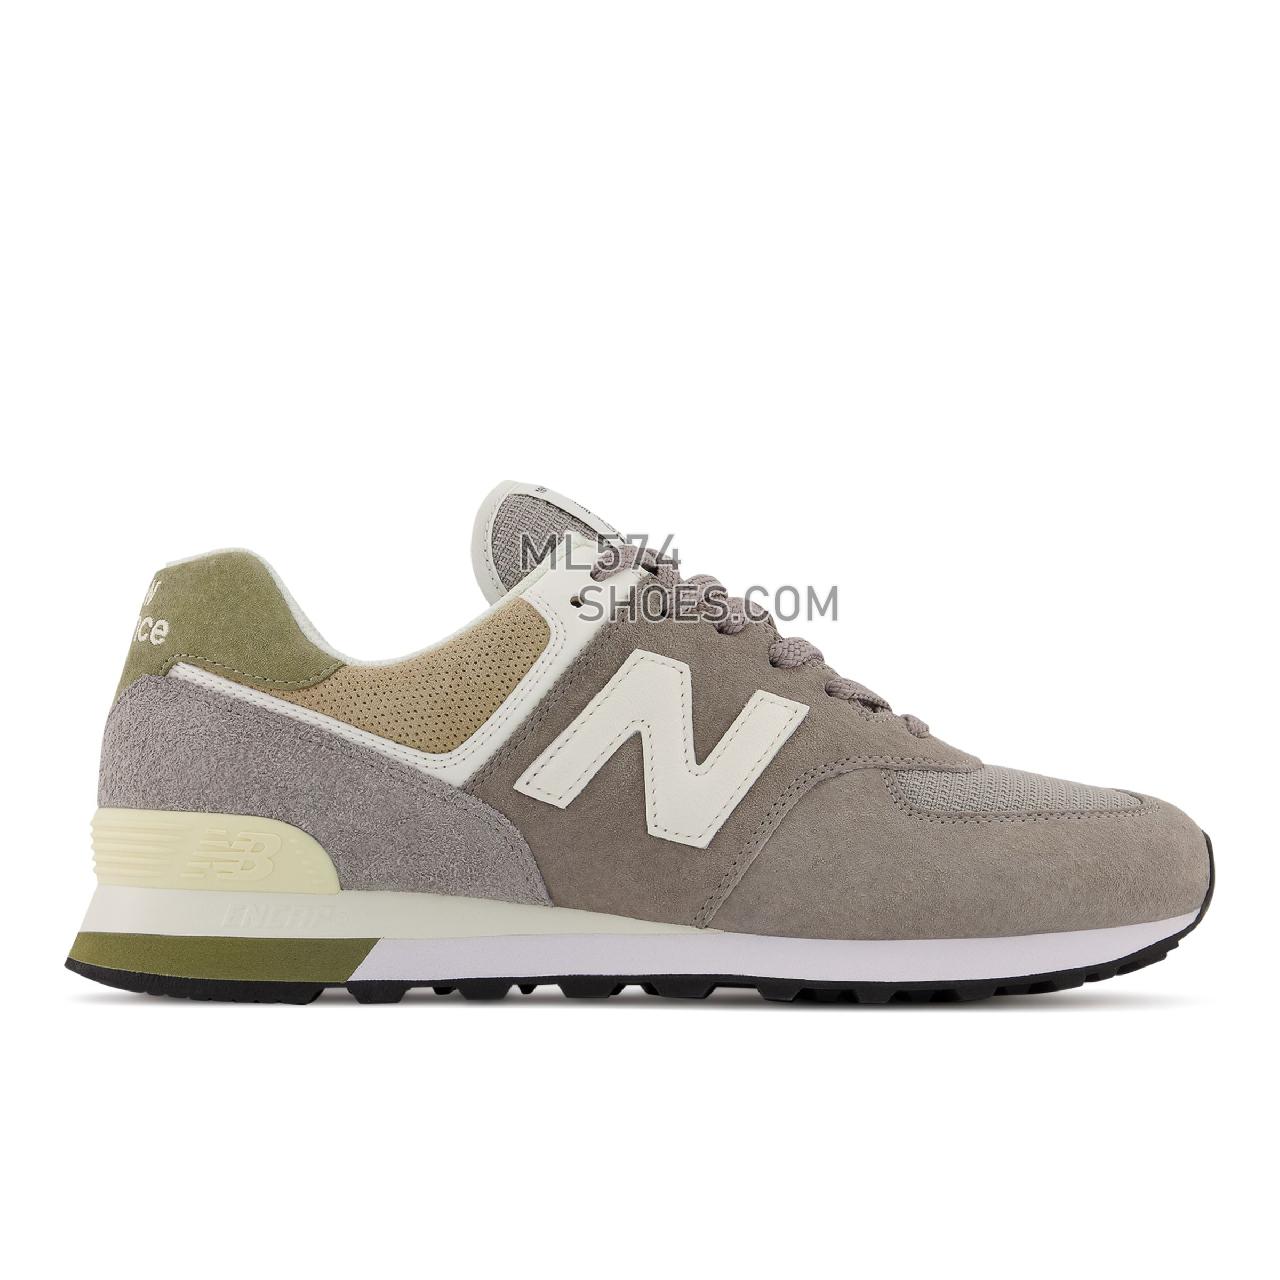 New Balance 574v2 - Men's Classic Sneakers - Marblehead with Incense - ML574TT2